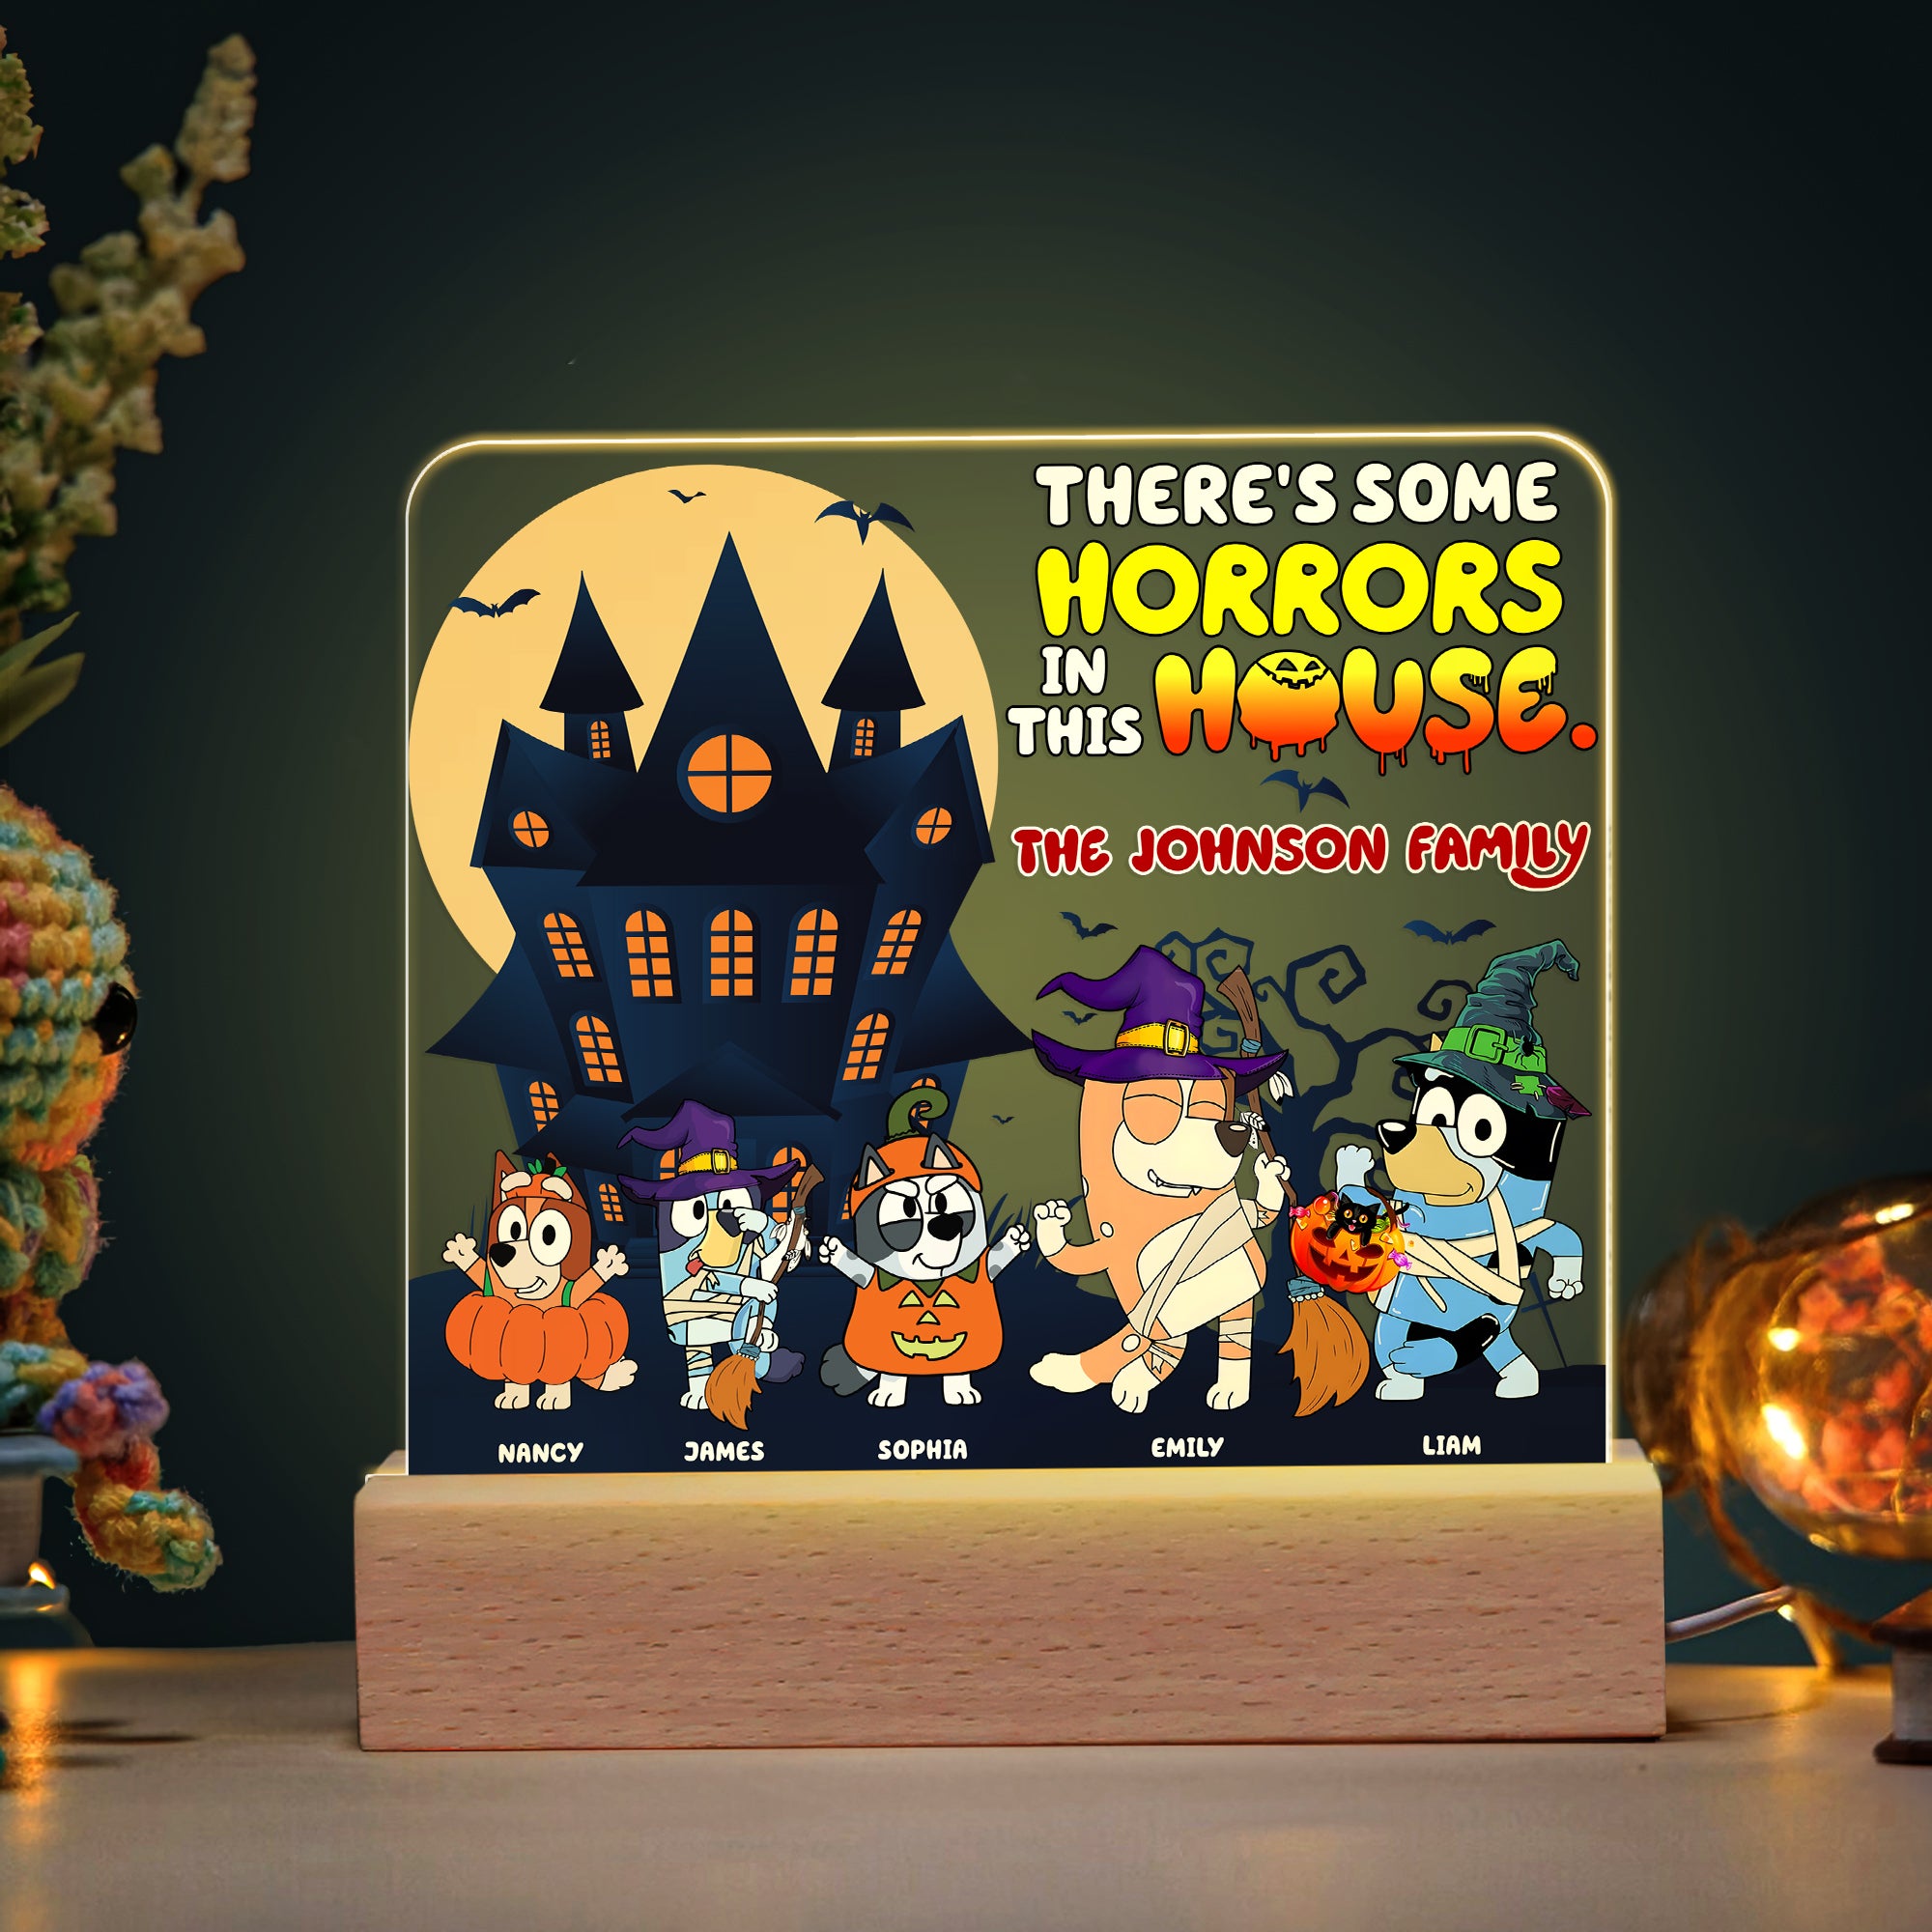 Personalized Gifts For Family LED Light 01kapu160724 Horror House-Homacus